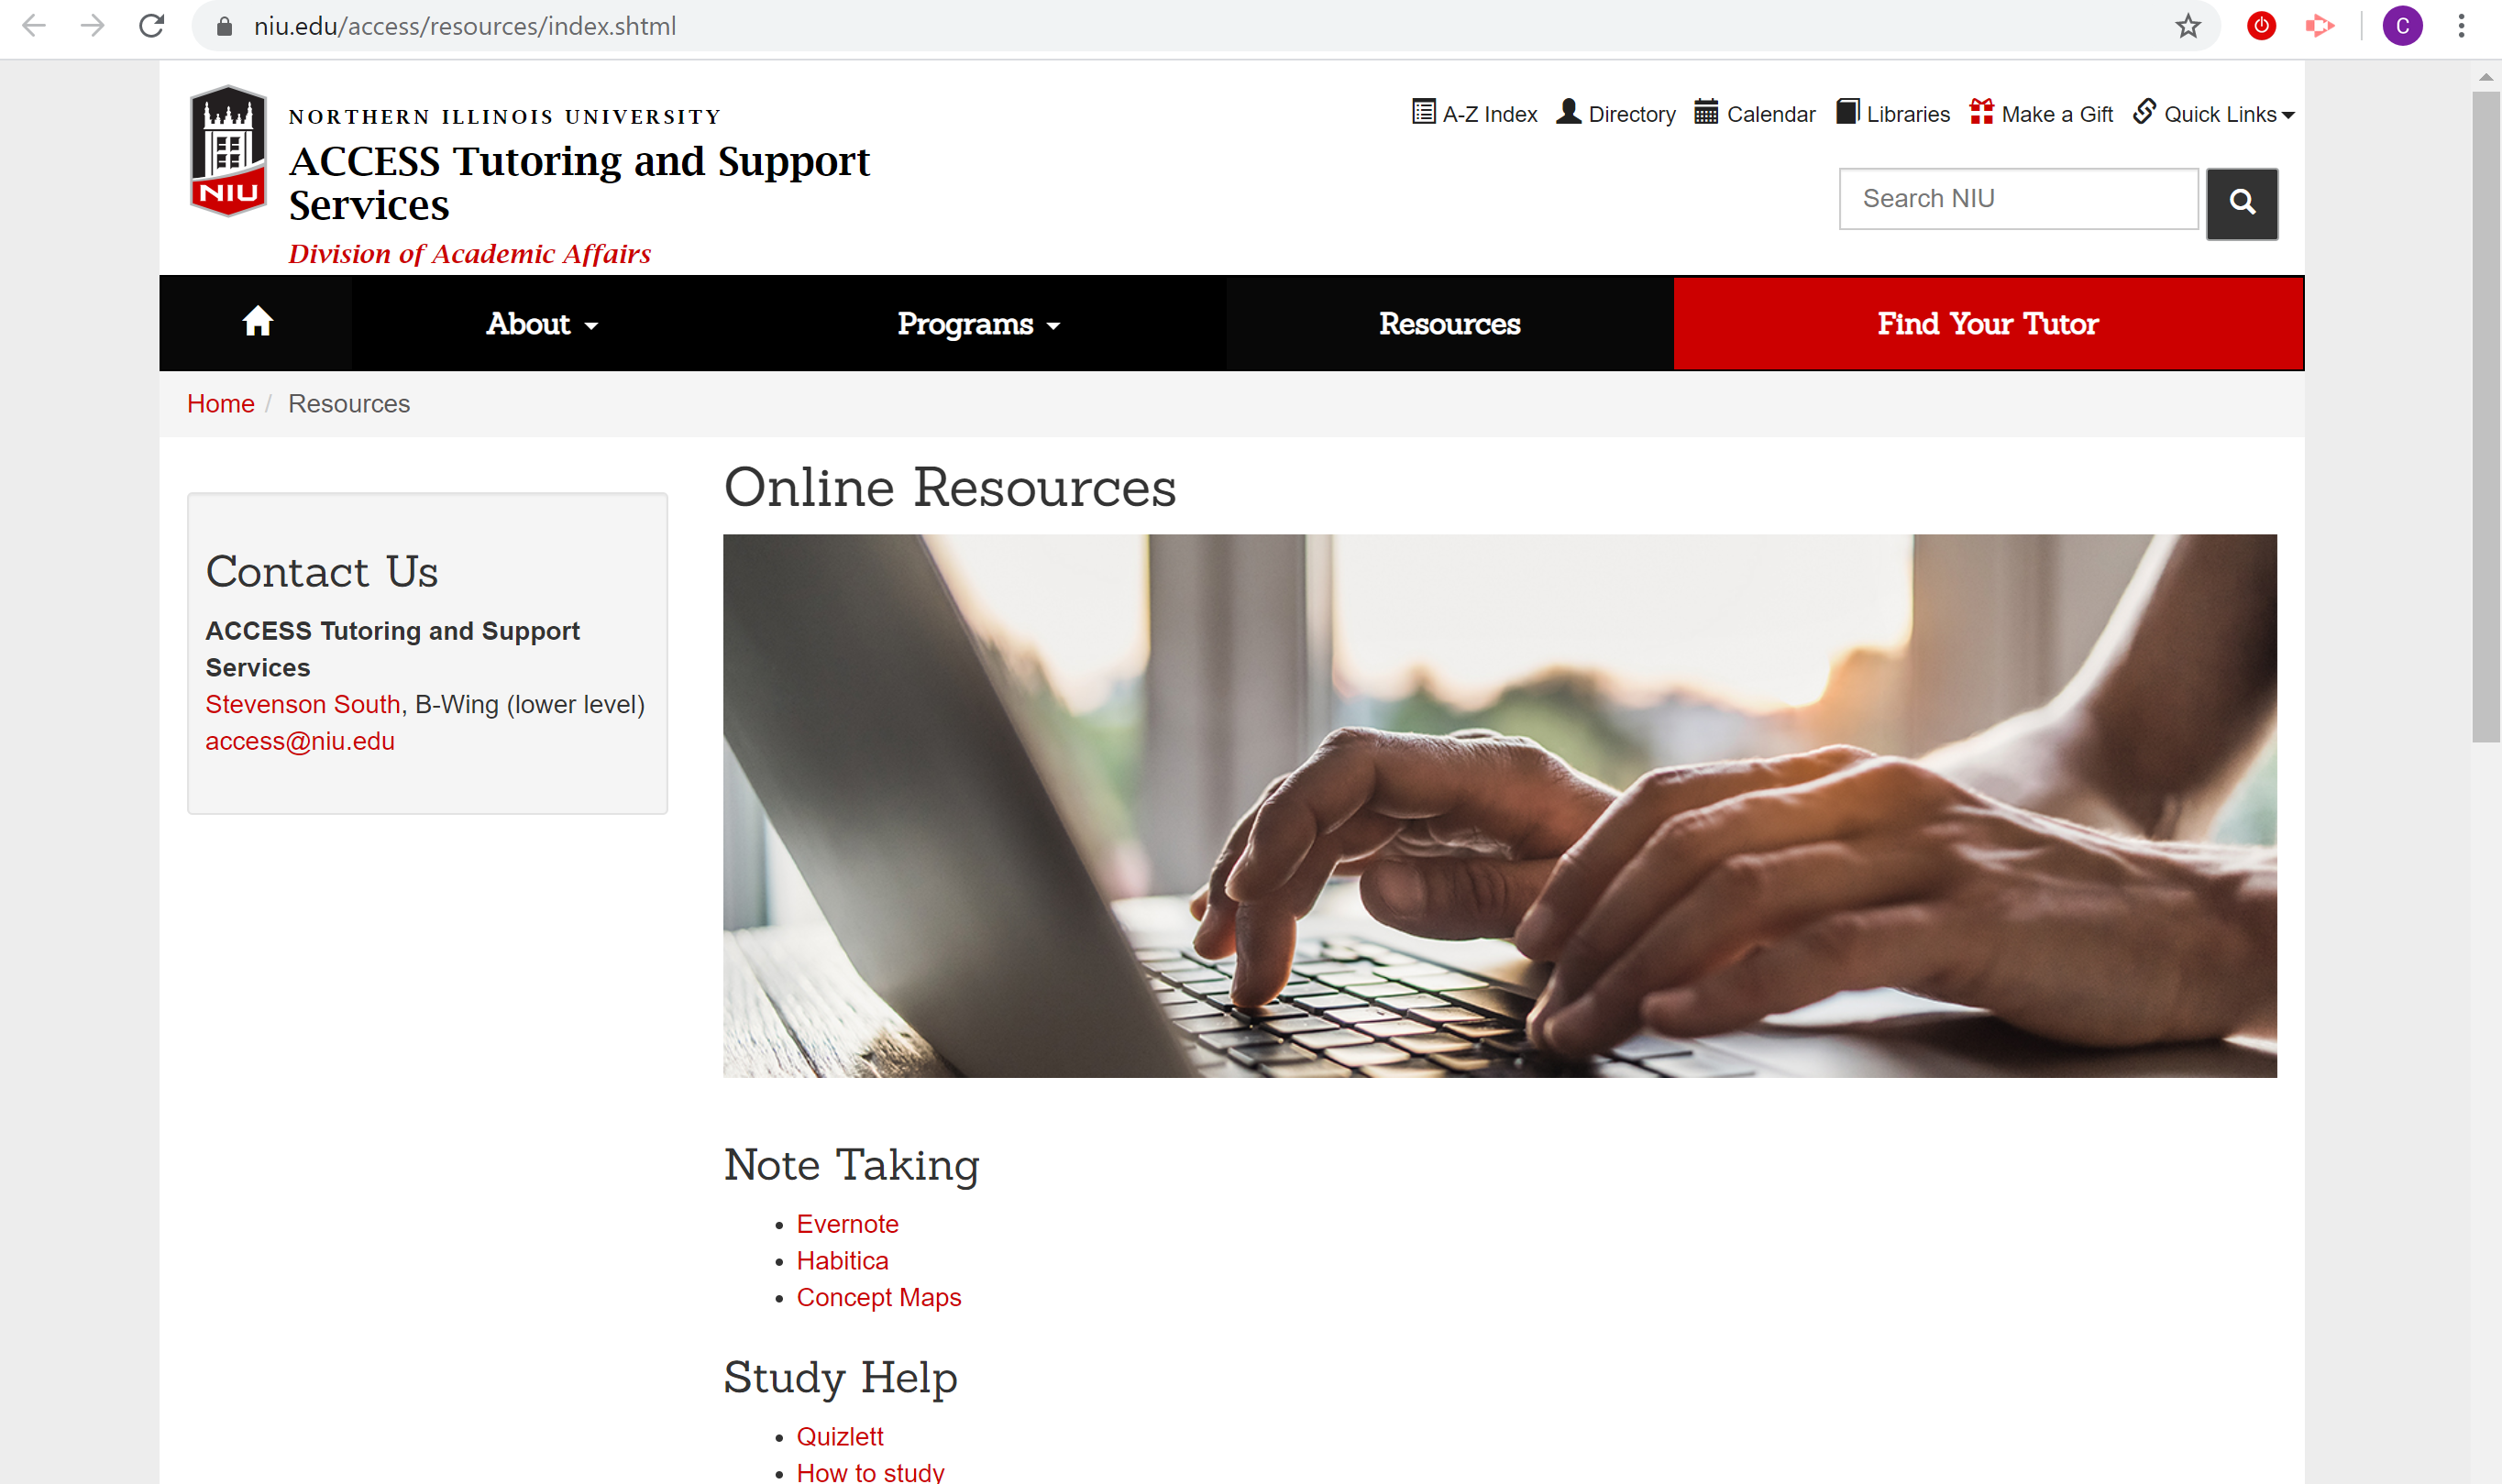 Online Resources from ACCESS Tutoring and Support Services